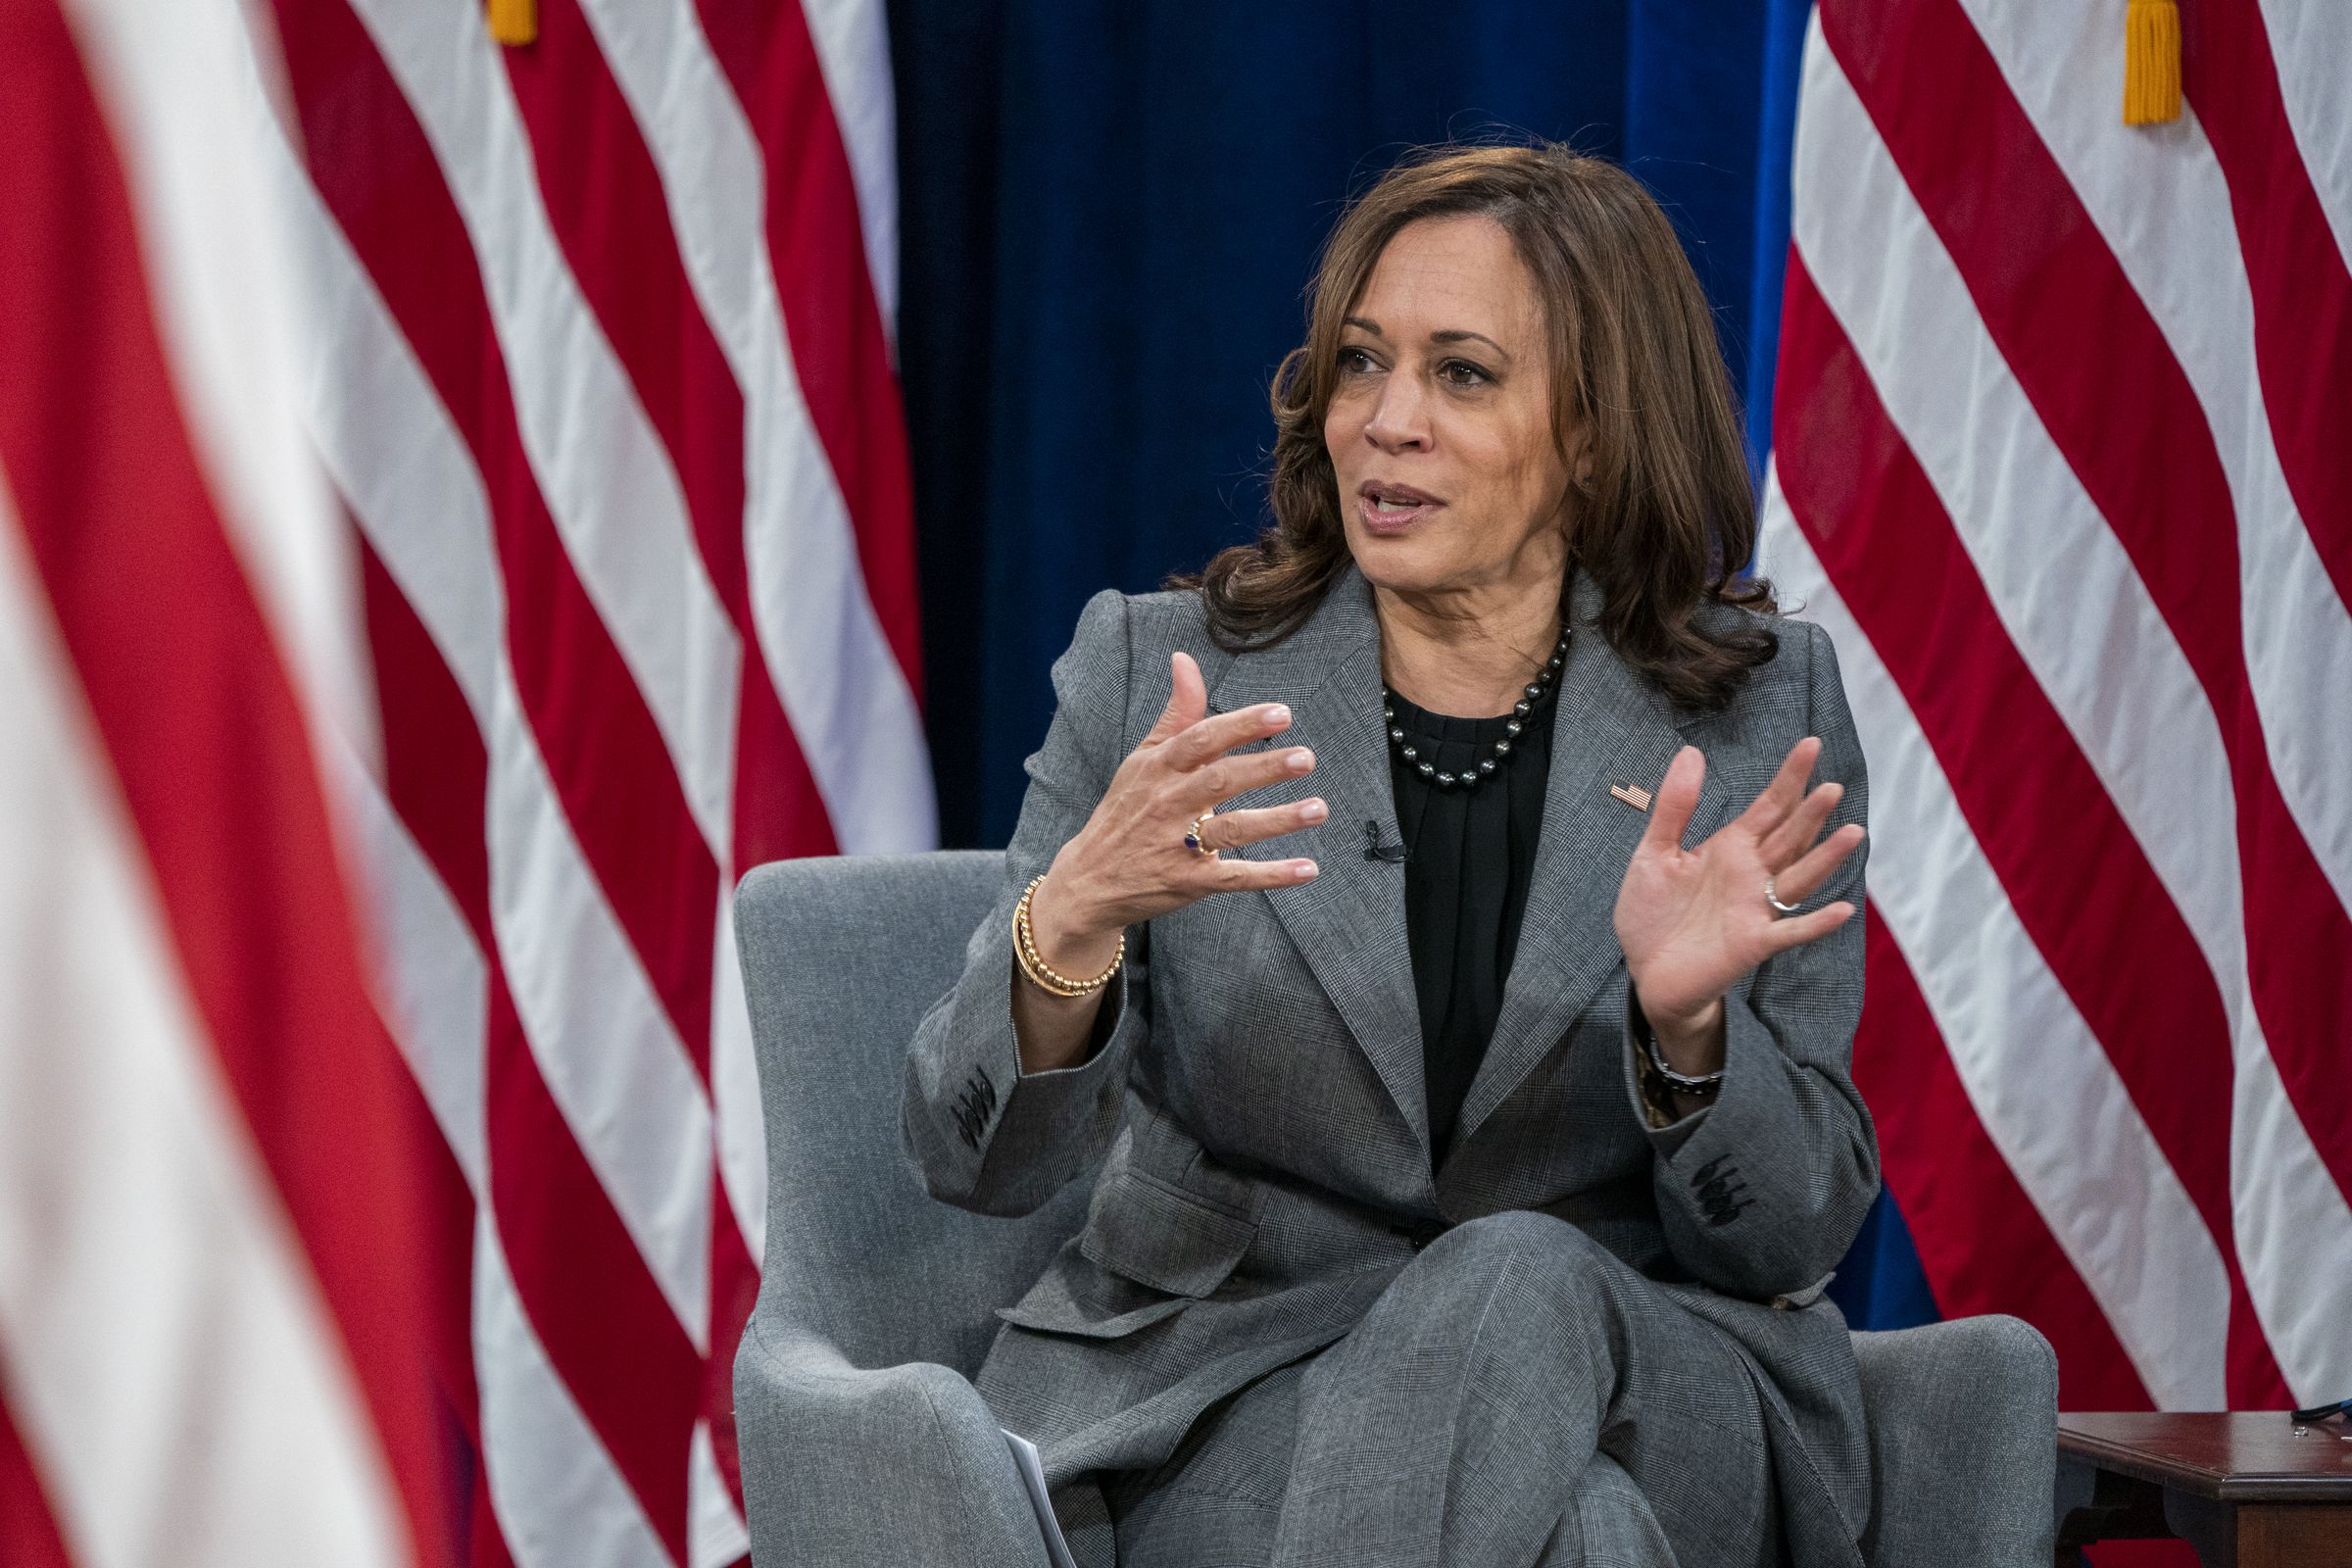 Vice President Kamala Harris Delivers Remarks At Maternal Health Day of Action Event